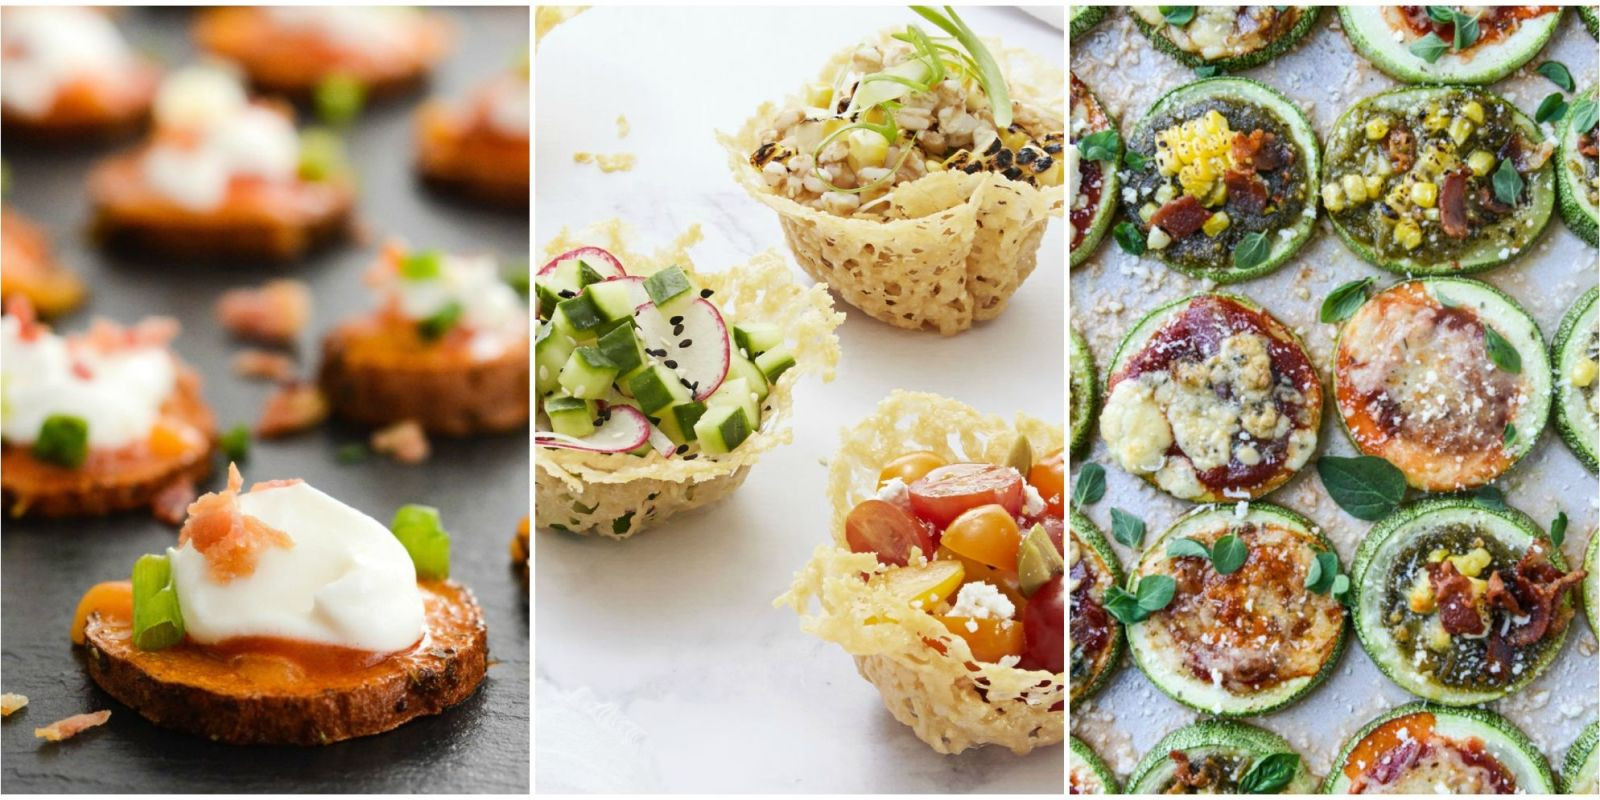 Healthy Christmas Appetizers For Parties
 25 Easy Healthy Appetizers Best Recipes for Healthy